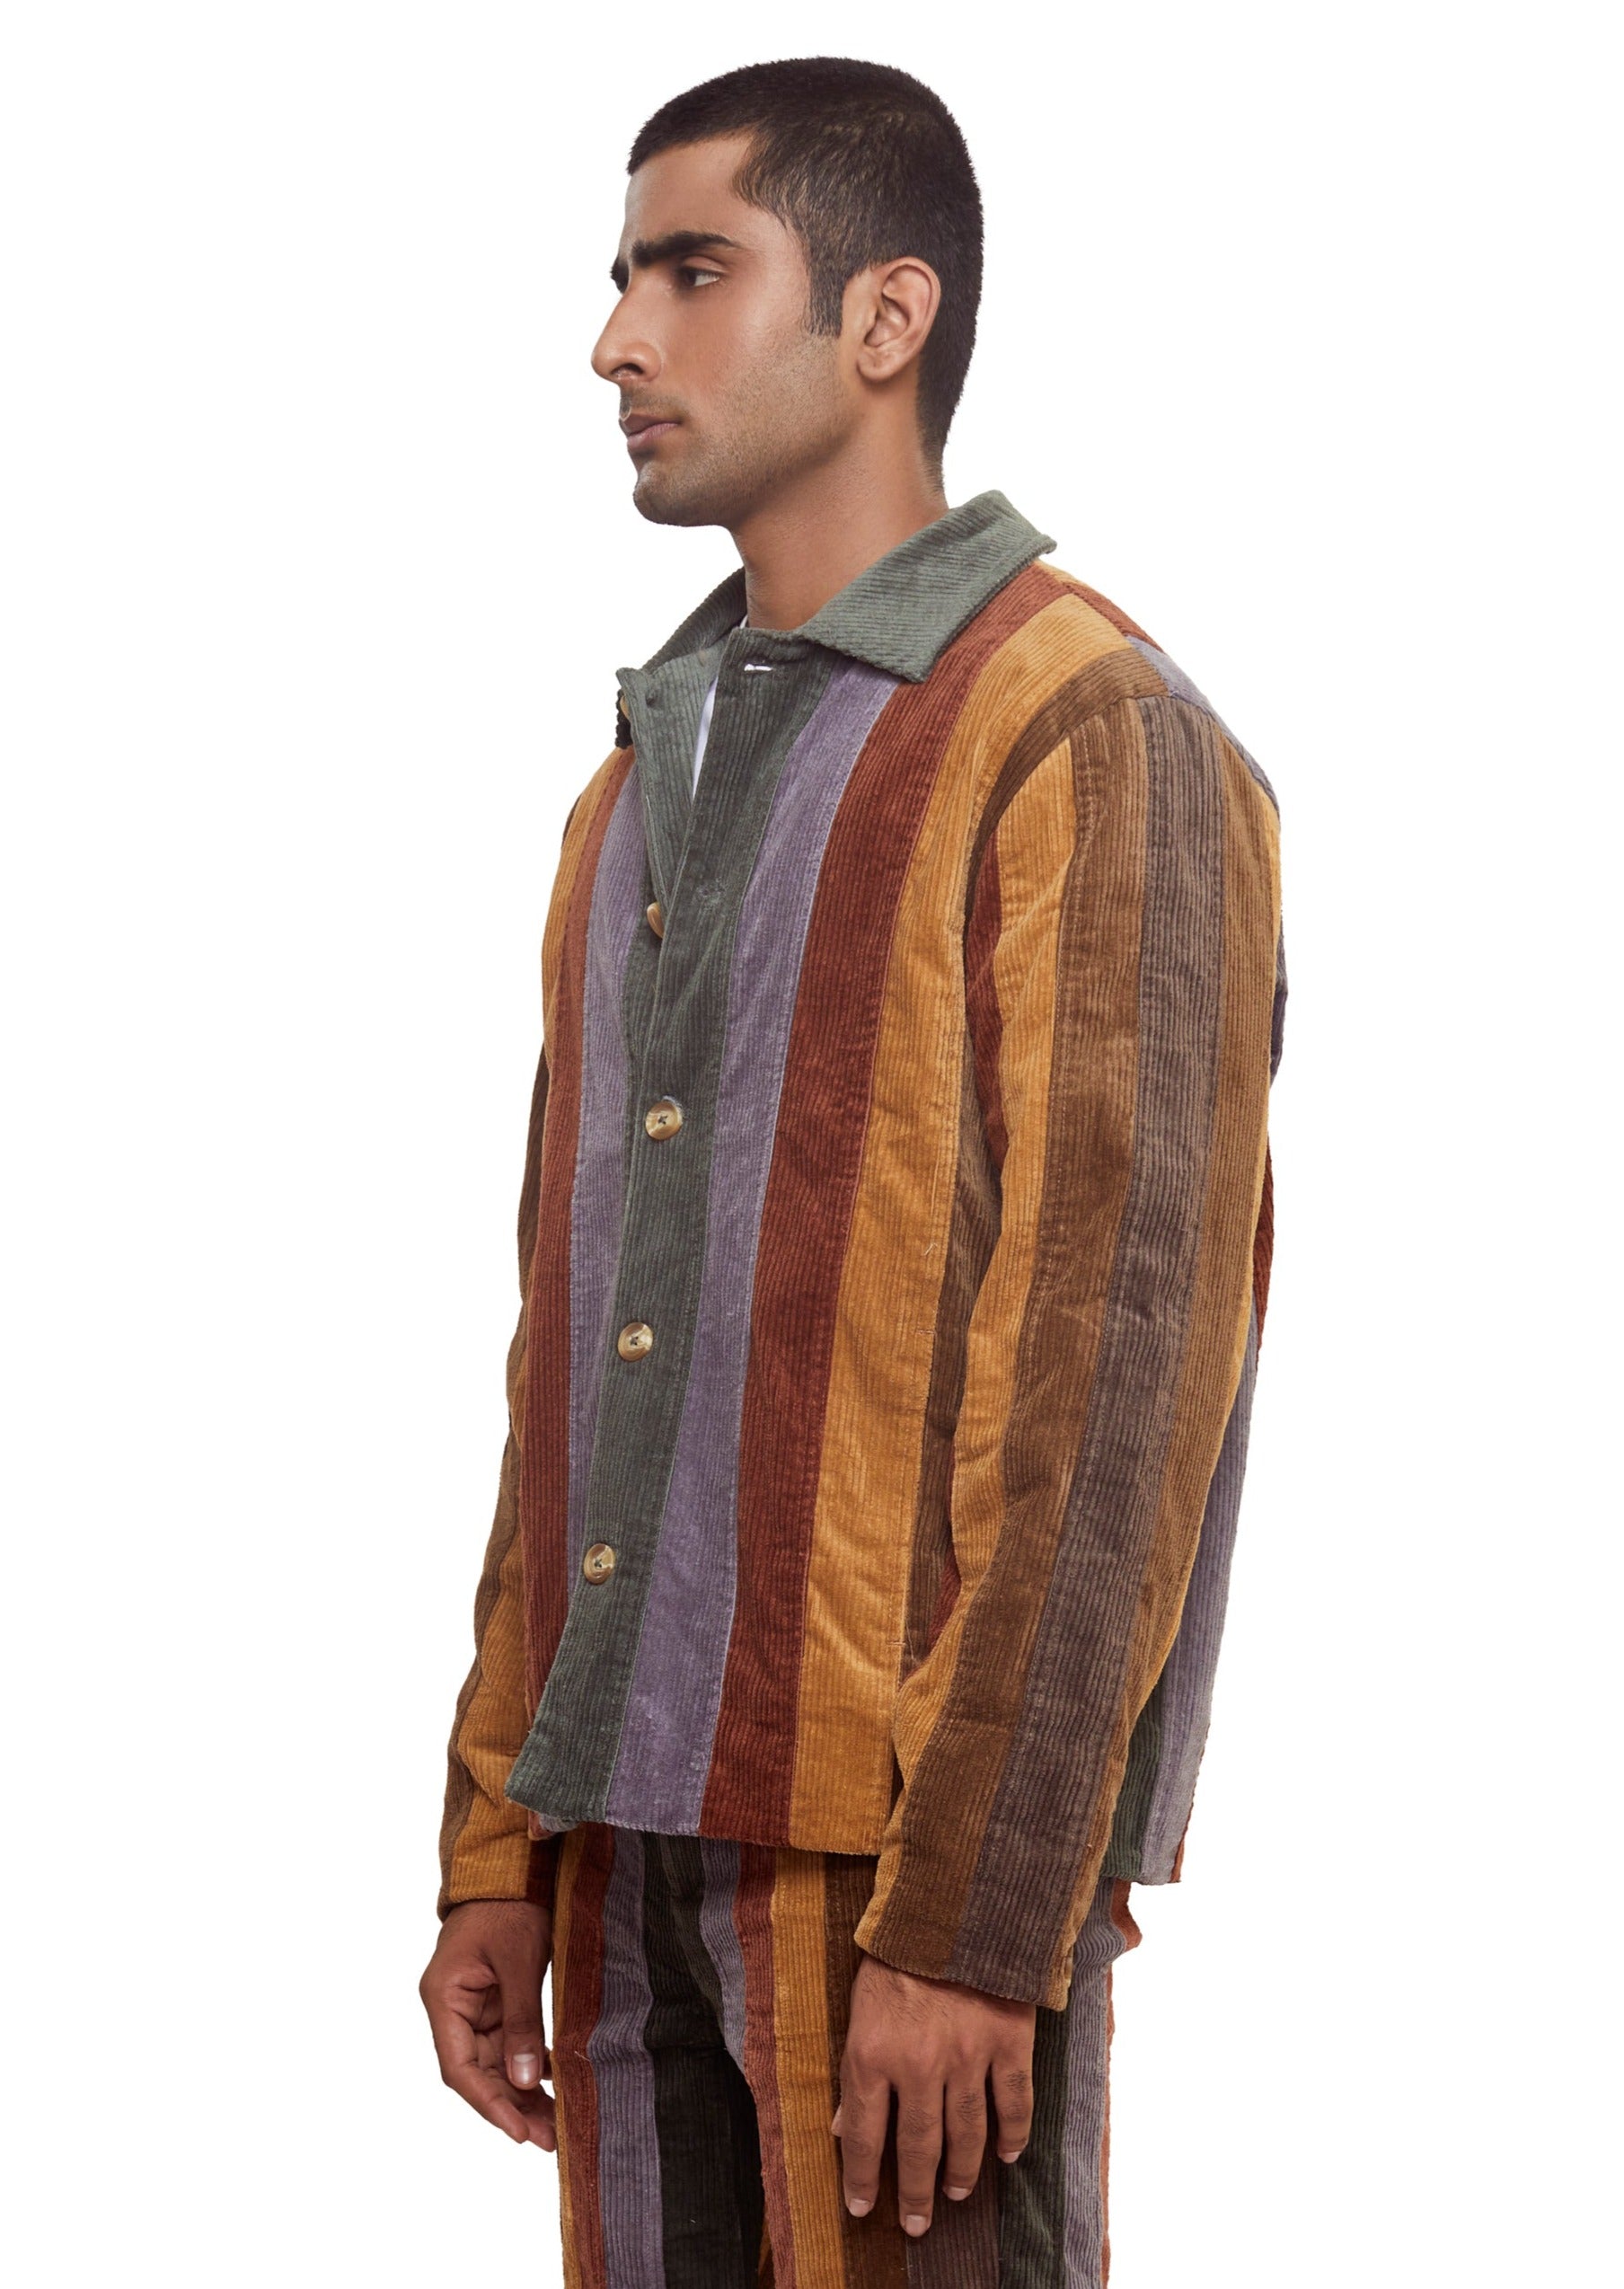 Brown cotton Vertical Paneled Corduroy Jacket from the brand Yitai